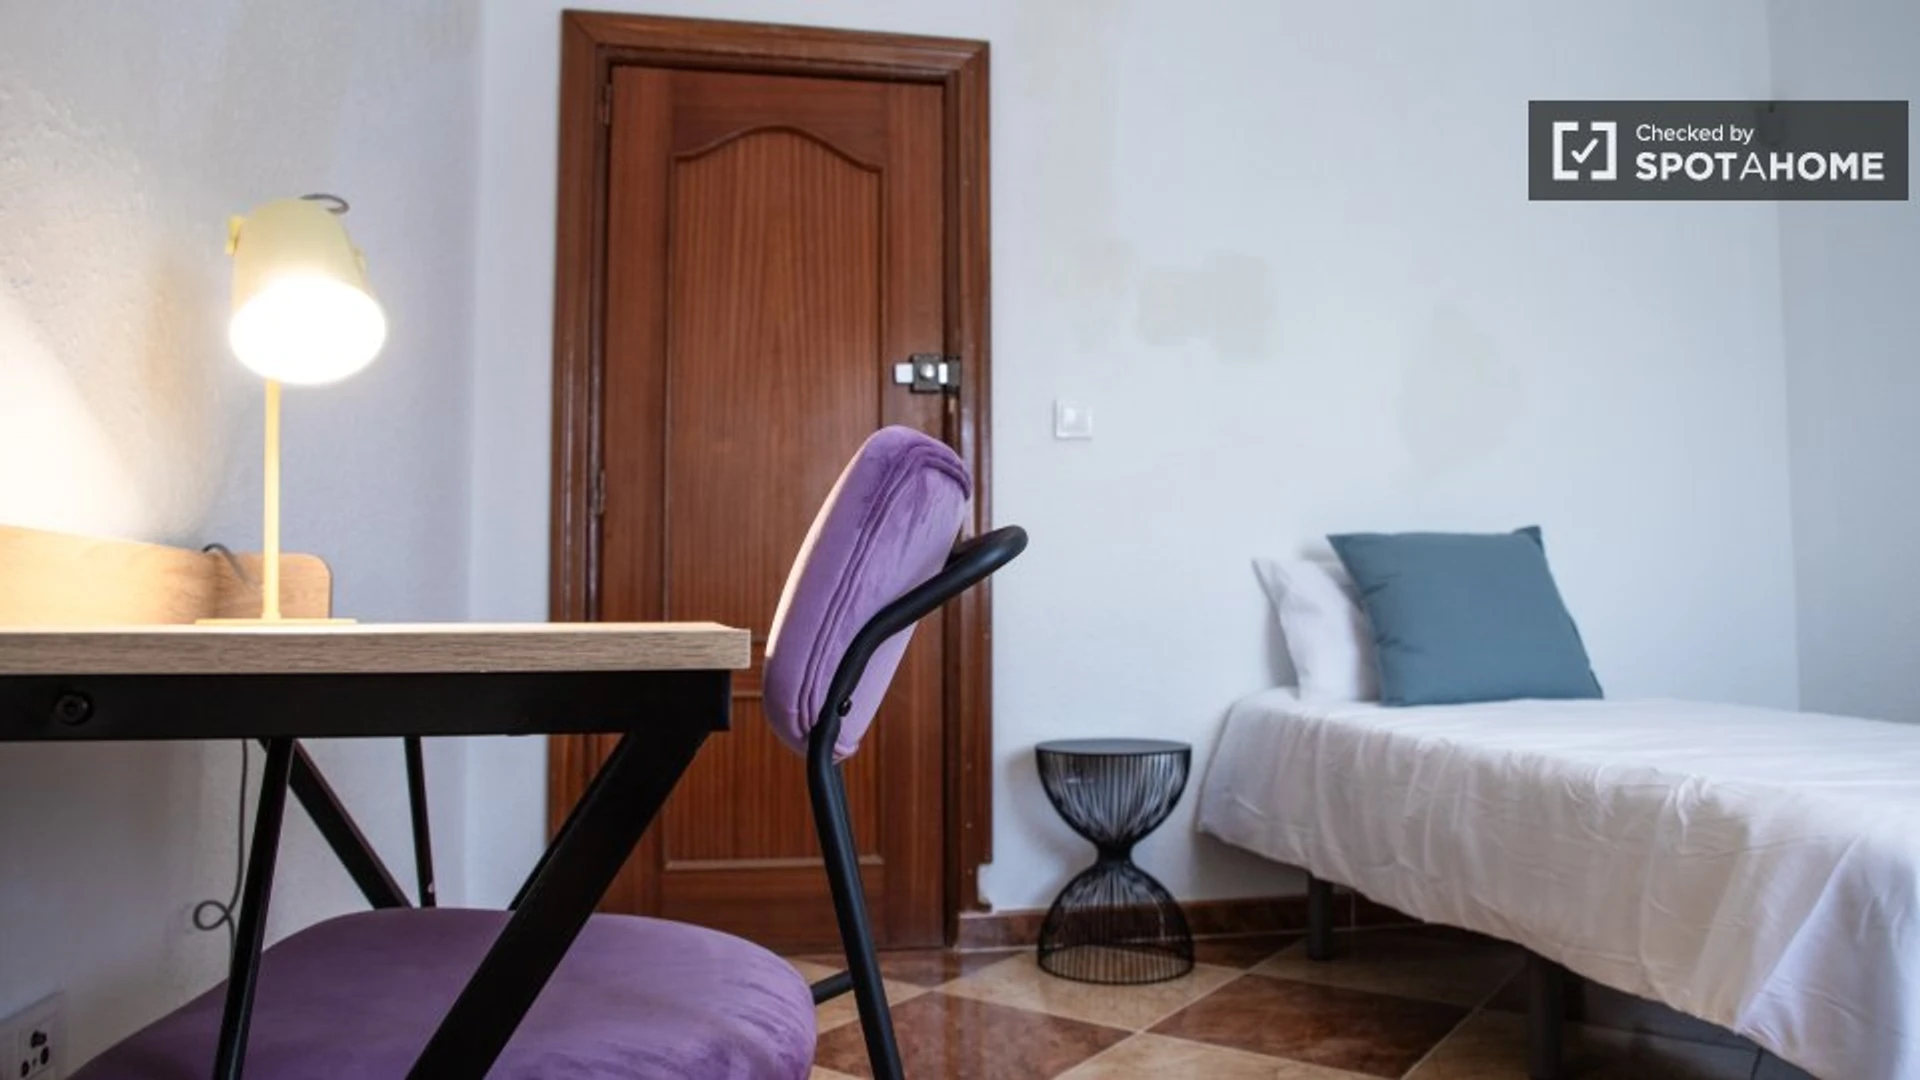 Room for rent with double bed Fuenlabrada